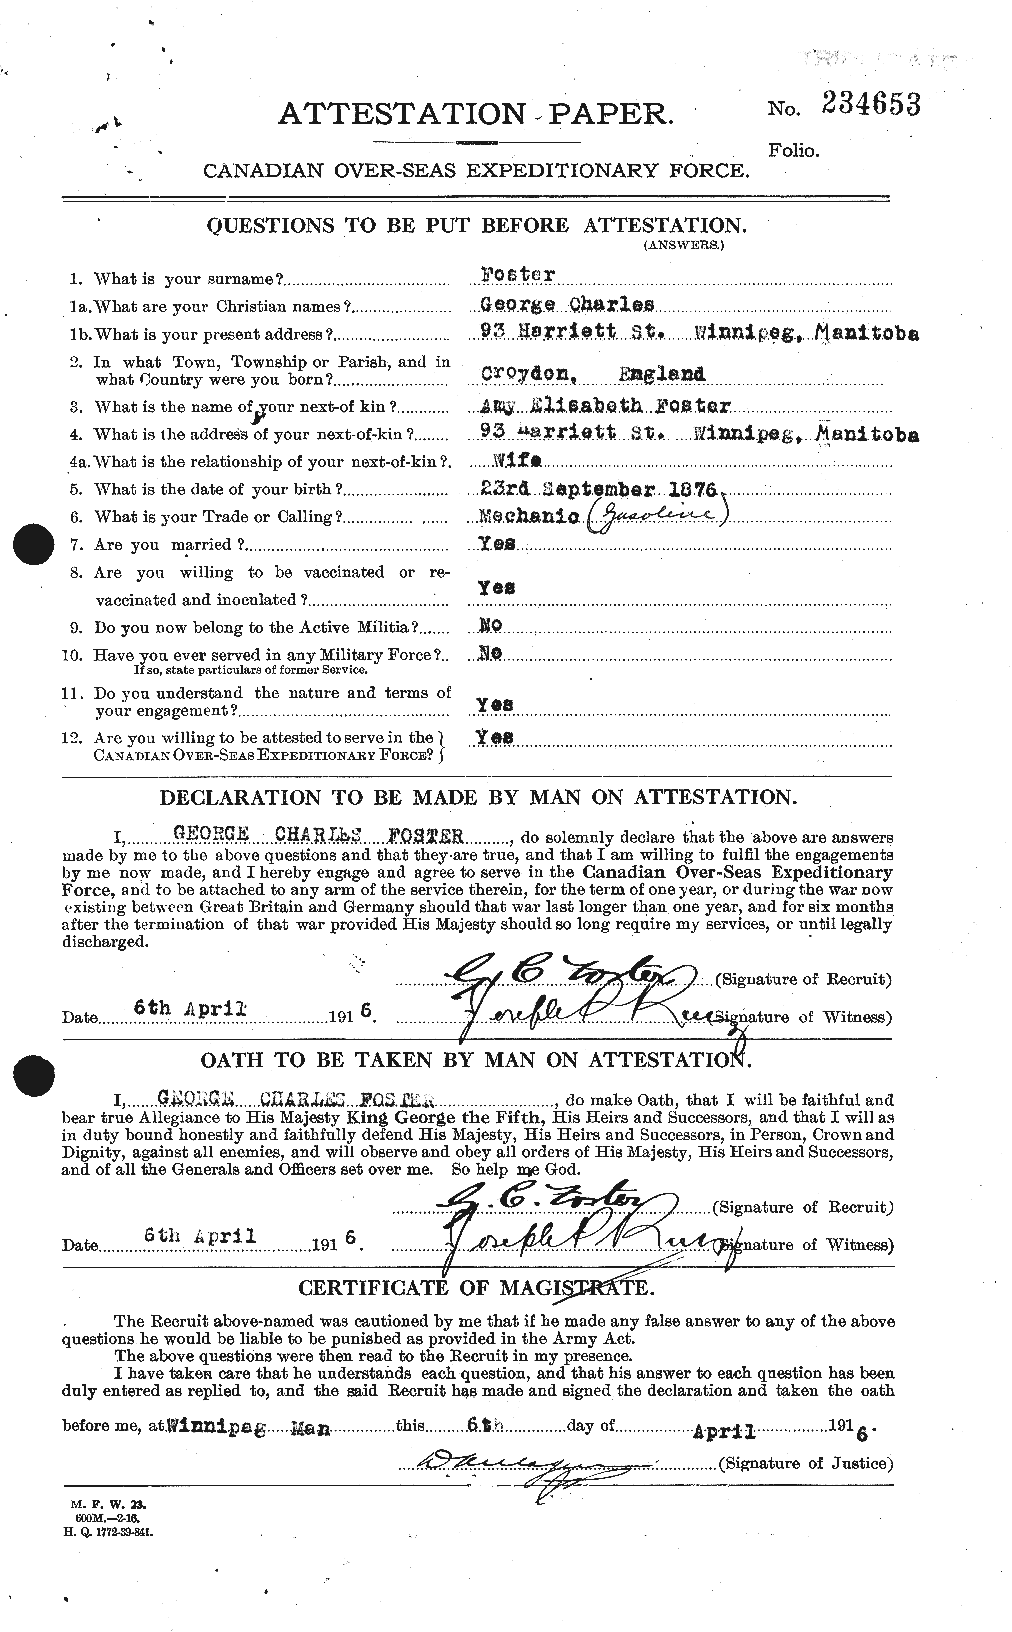 Personnel Records of the First World War - CEF 330683a